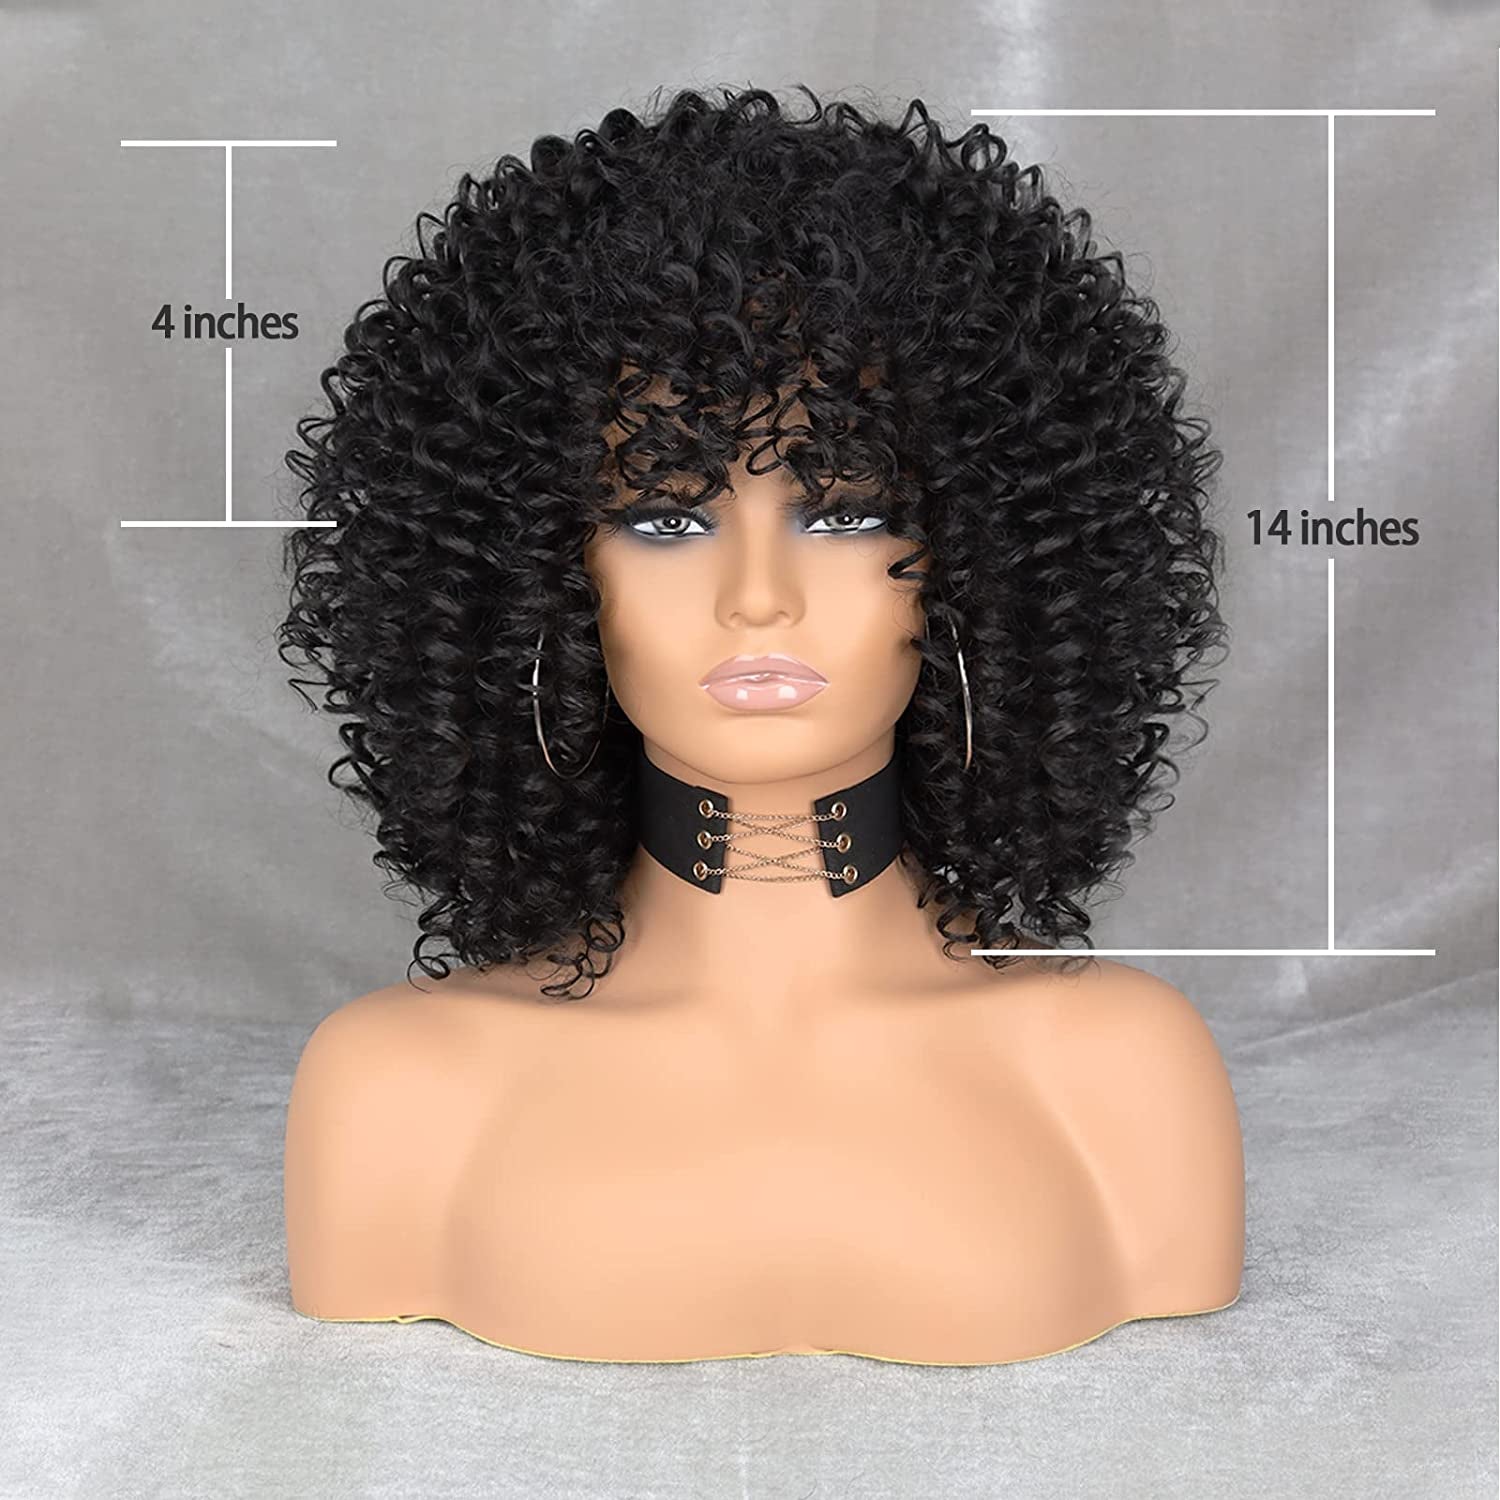 Xinran Black Curly Afro Wig for Women, Kinky Black Curly Wigs for Women, Natural Synthetic Curly Wig with Bangs